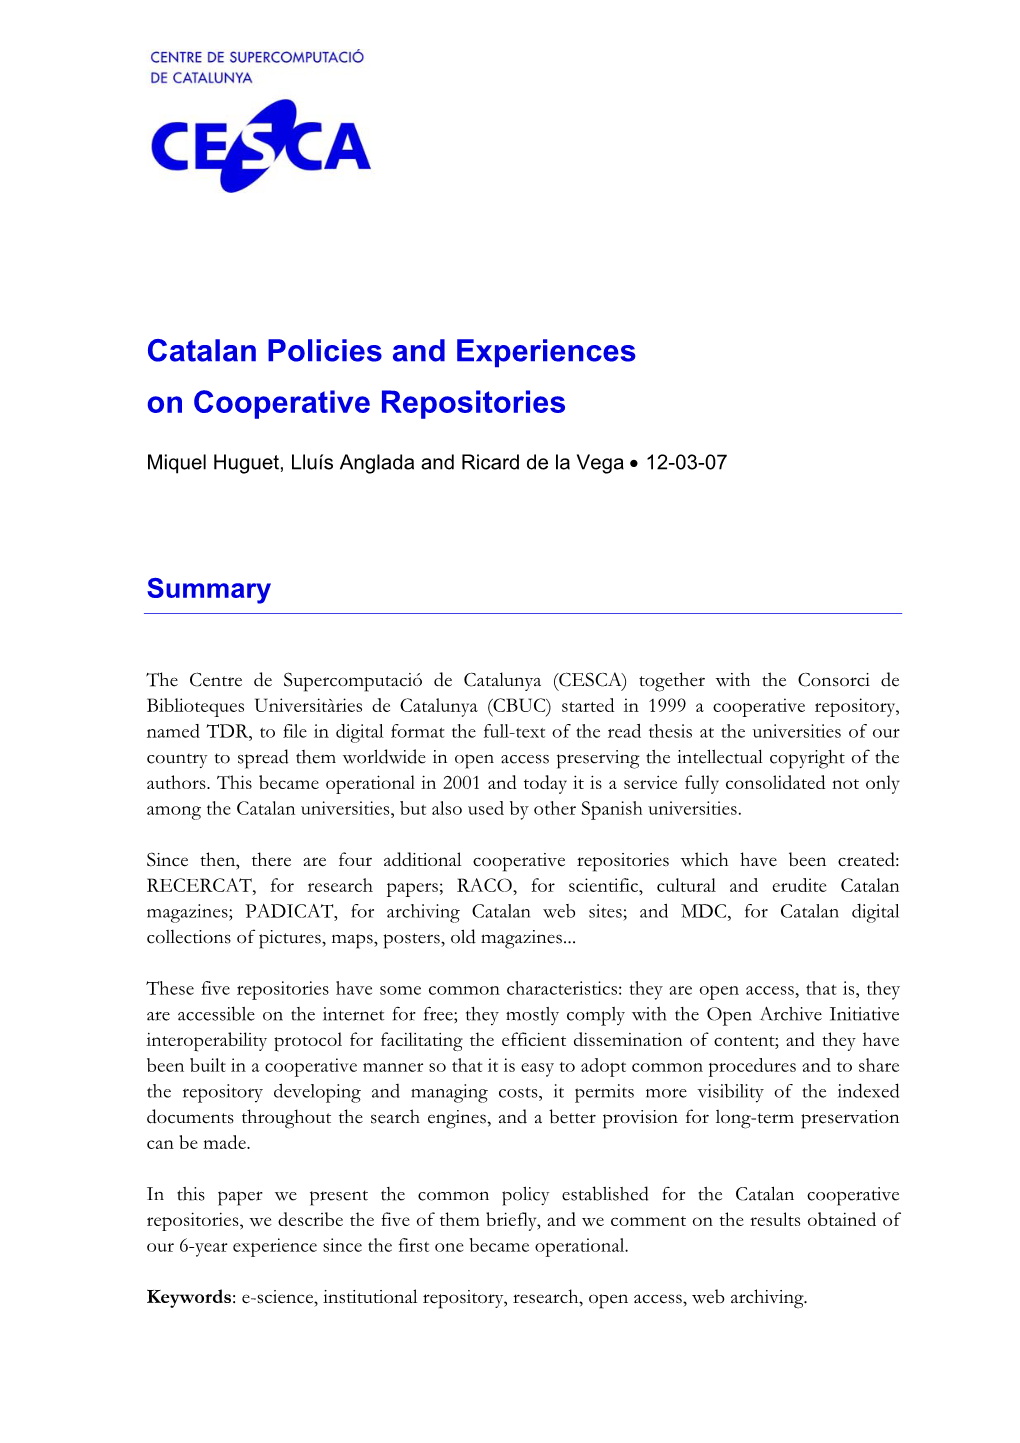 Catalan Policy and Experiences on Cooperative Repositories